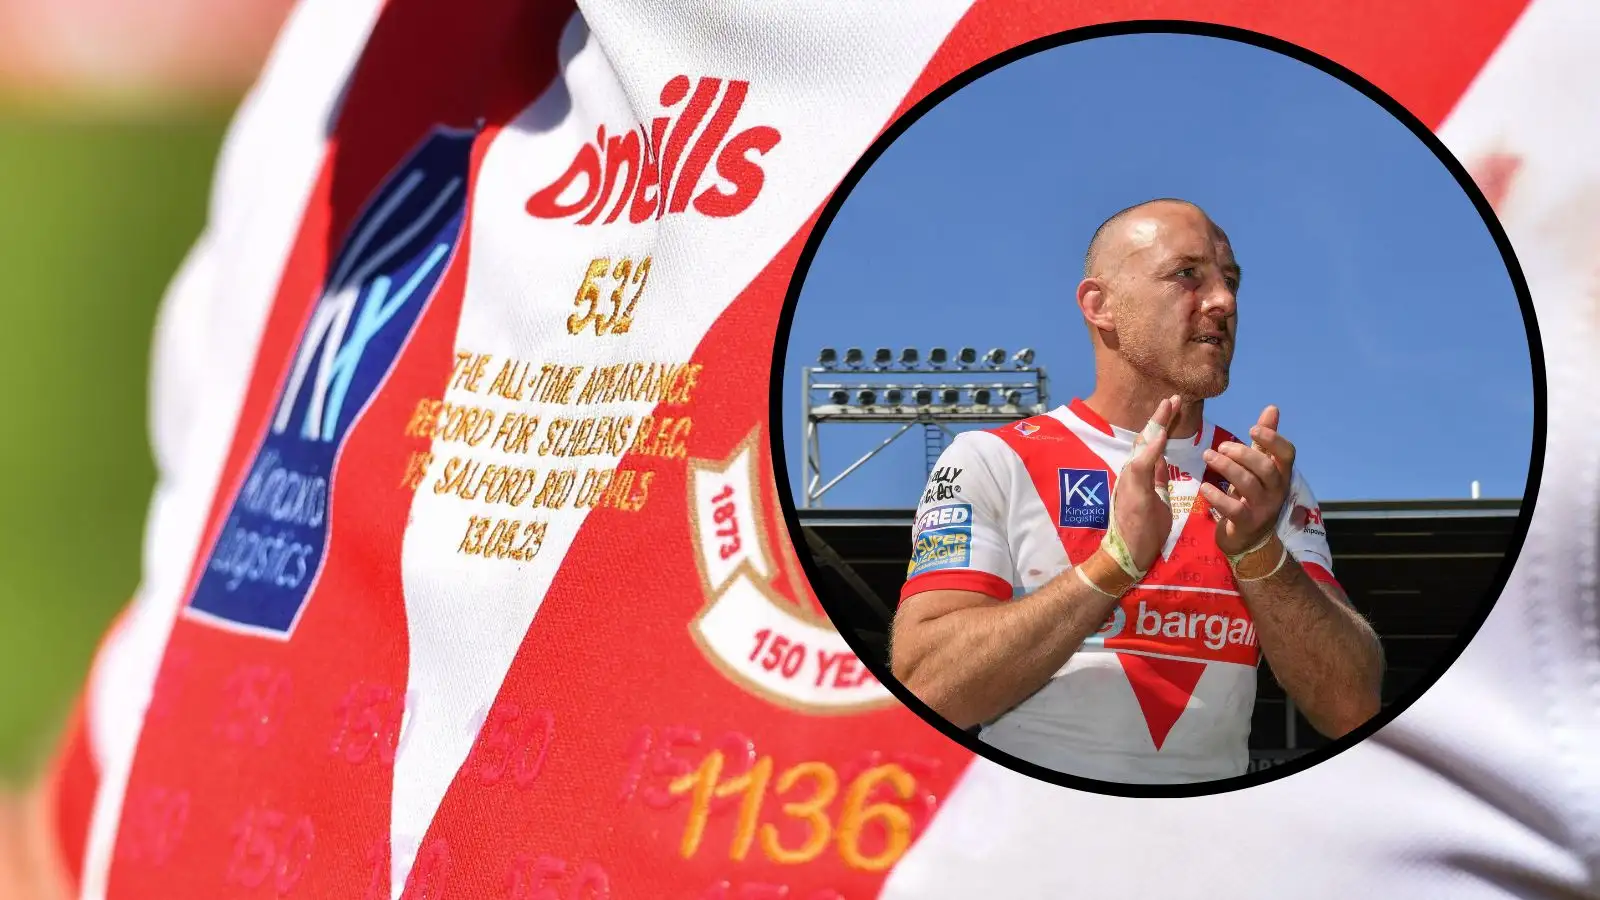 St Helens icon James Roby inducted into Hall of Fame as tradition broken for ‘The Greatest of All Time’